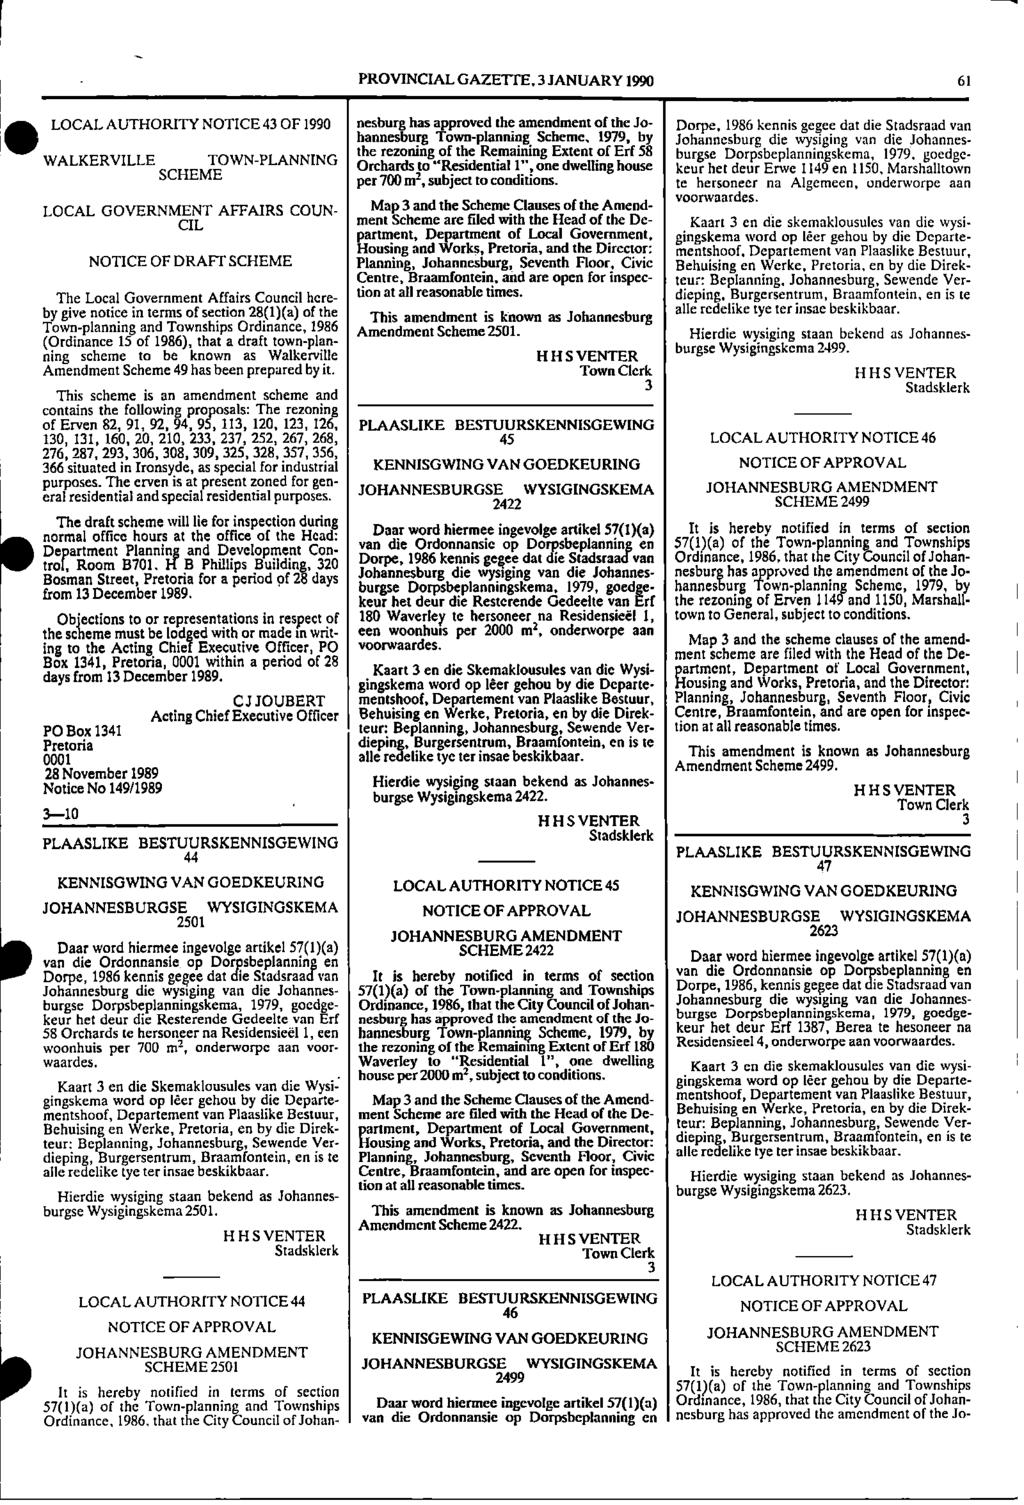 1 PROVNCAL GAZETTE, 3 JANUARY 1990 61 a LOCAL AUTHORTY NOTCE 43 OF 1990 nesburg has approved the amendment of the Jo Dorpe, 1986 kennis gegee dat die Stadsraad van lop hannesburg Townplanning Scheme,